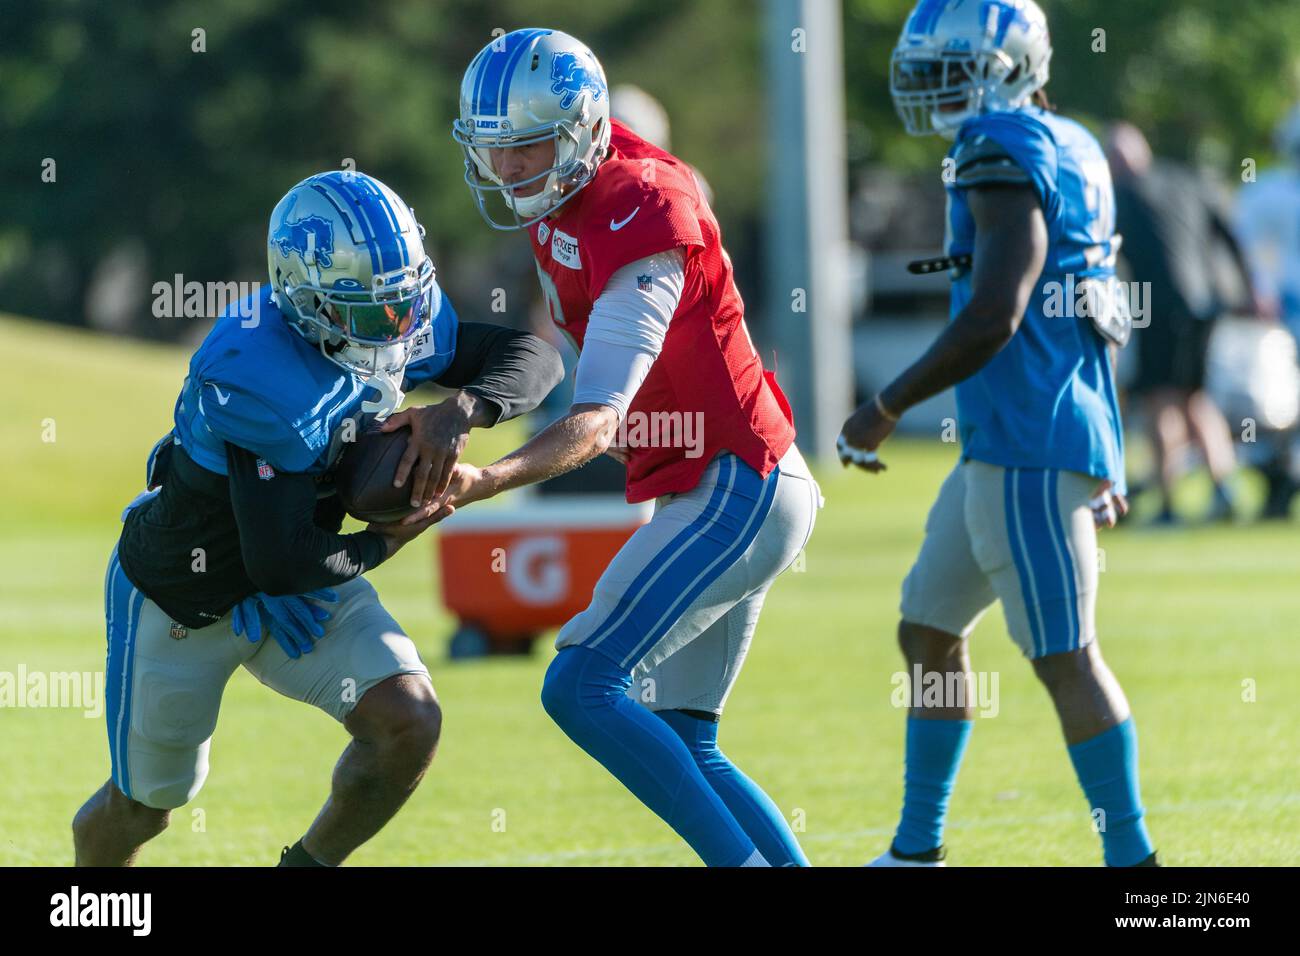 ALLEN PARK, MI - AUGUST 09: Detroit Lions QB Jared Goff (16) hands-off to Detroit Lions RB D'Andre Swift (32) during Lions training camp on August 9, 2022 at Detroiit Lions Training Facility in Allen Park, MI (Photo by Allan Dranberg/CSM) Credit: Cal Sport Media/Alamy Live News Stock Photo